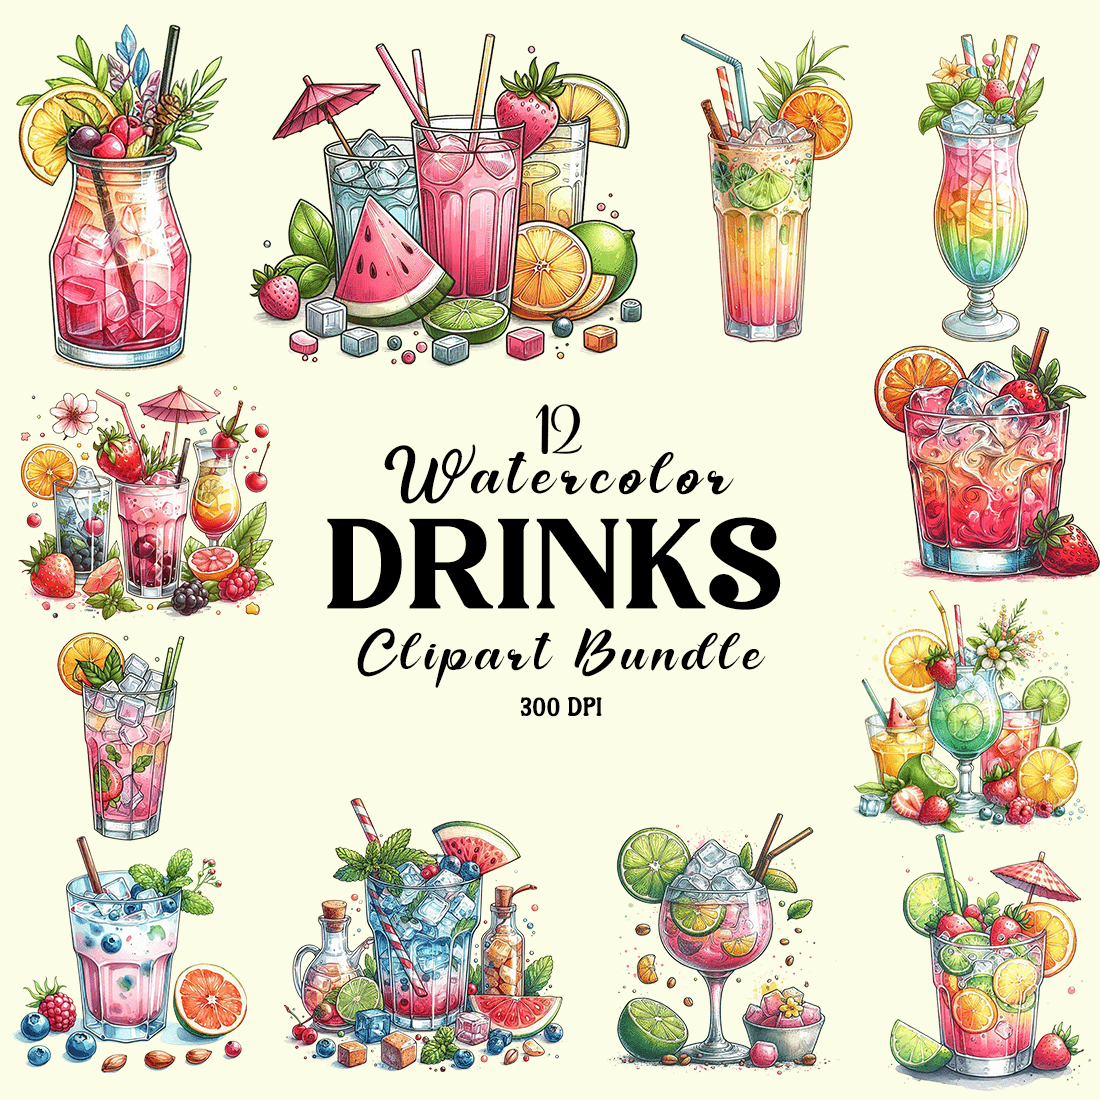 Watercolor Drinks Clipart Bundle cover image.